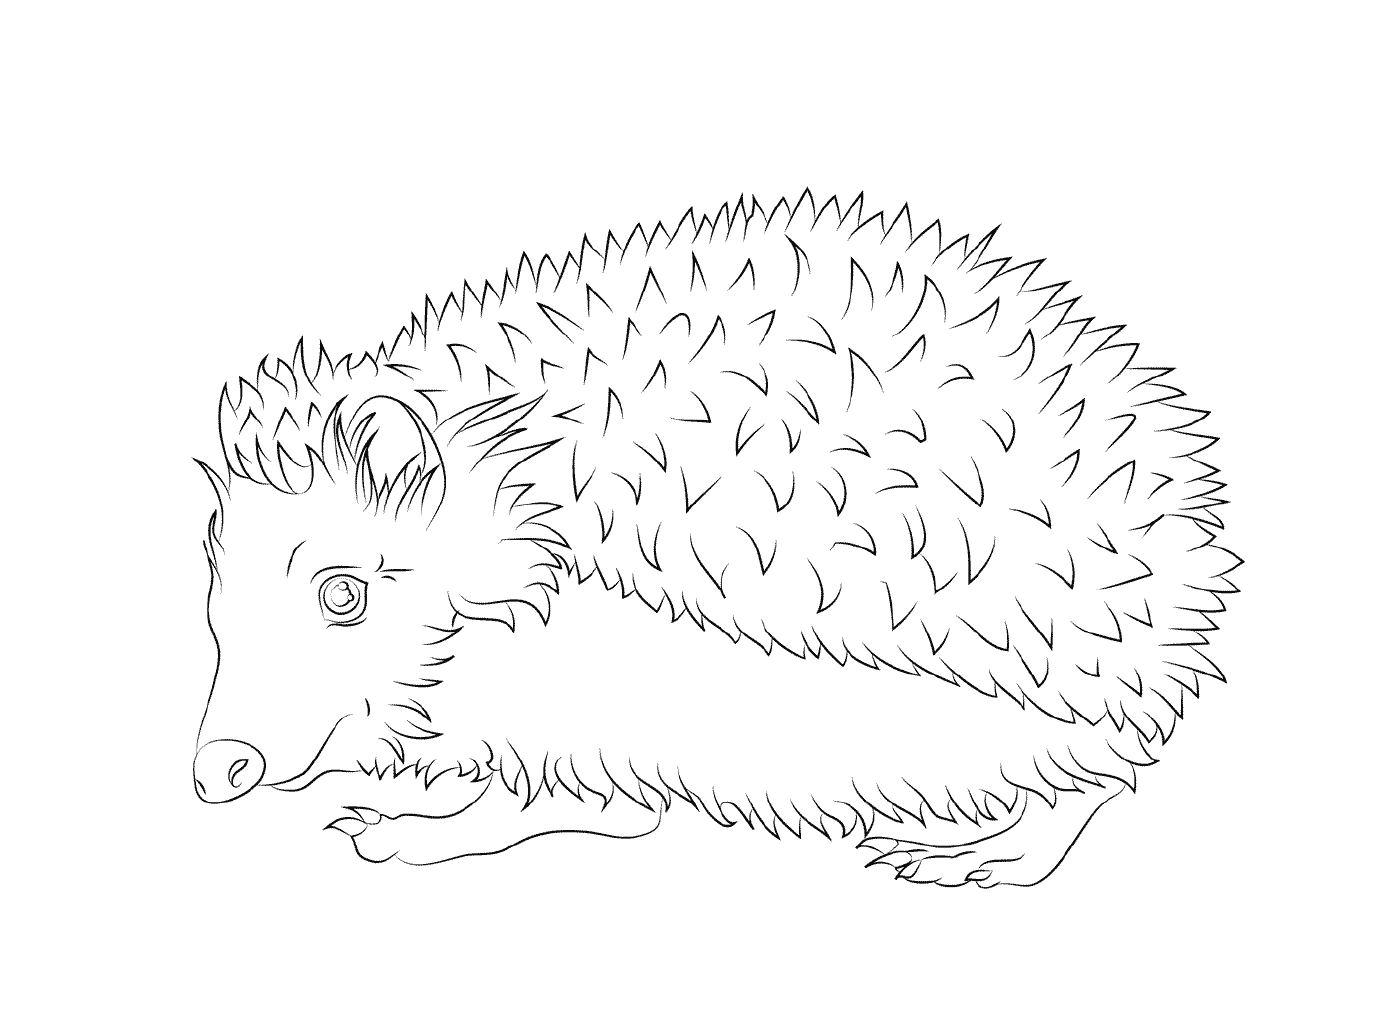  Hedgehog with his thorns 